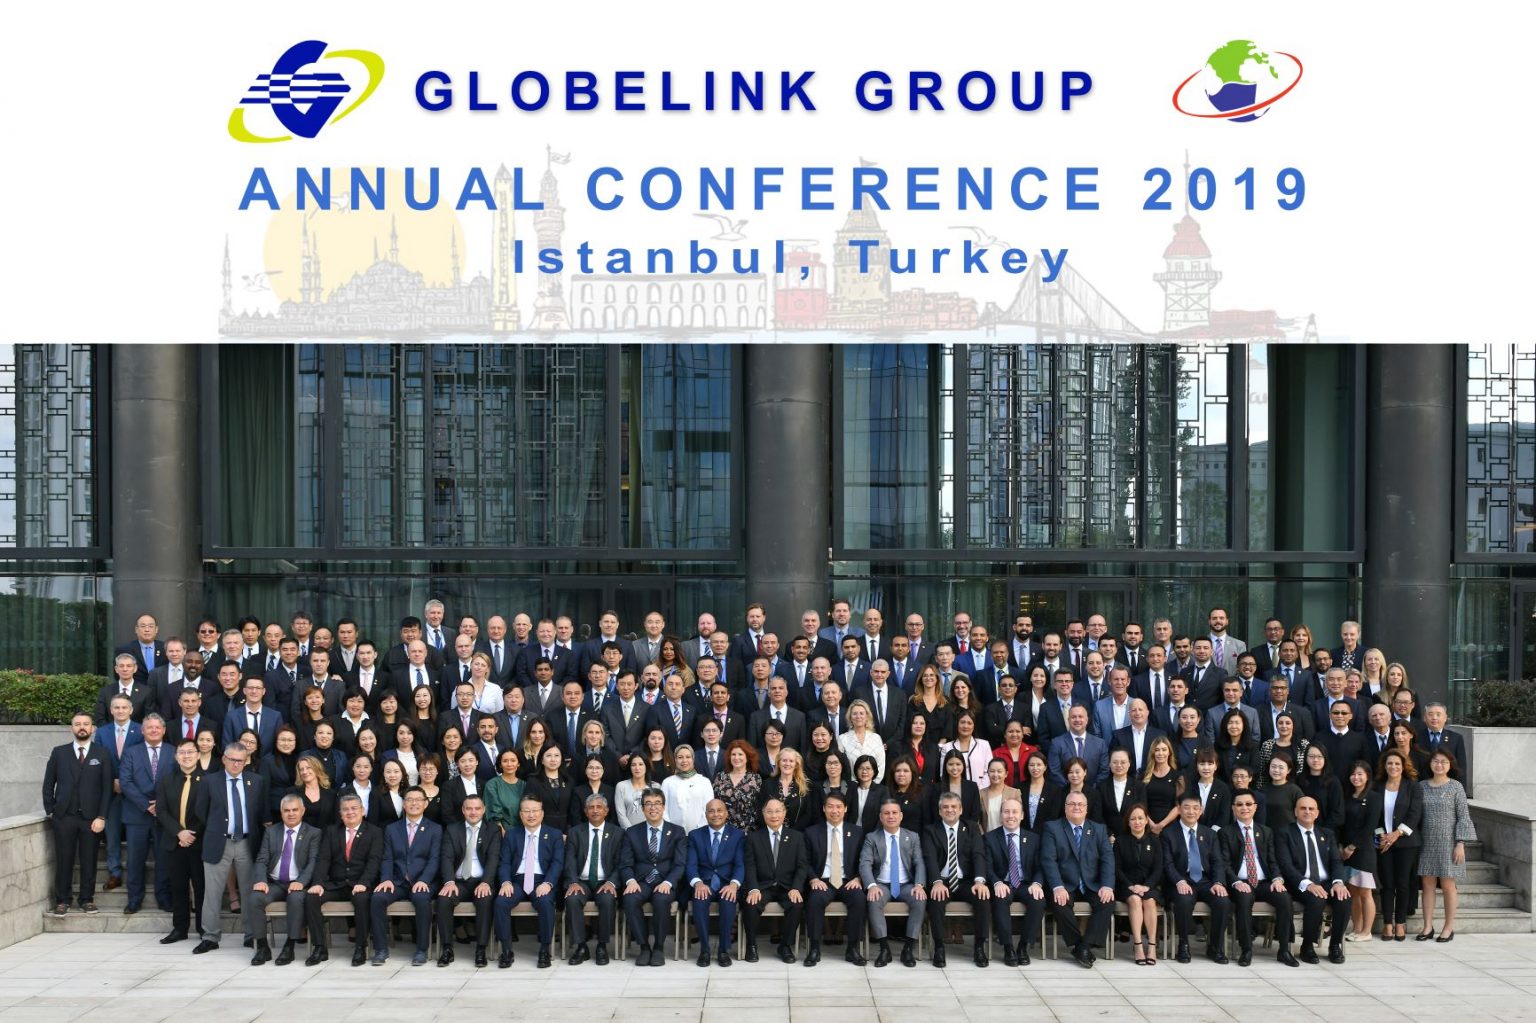 Globelink Group Annual Conference Has Been Organized in Istanbul